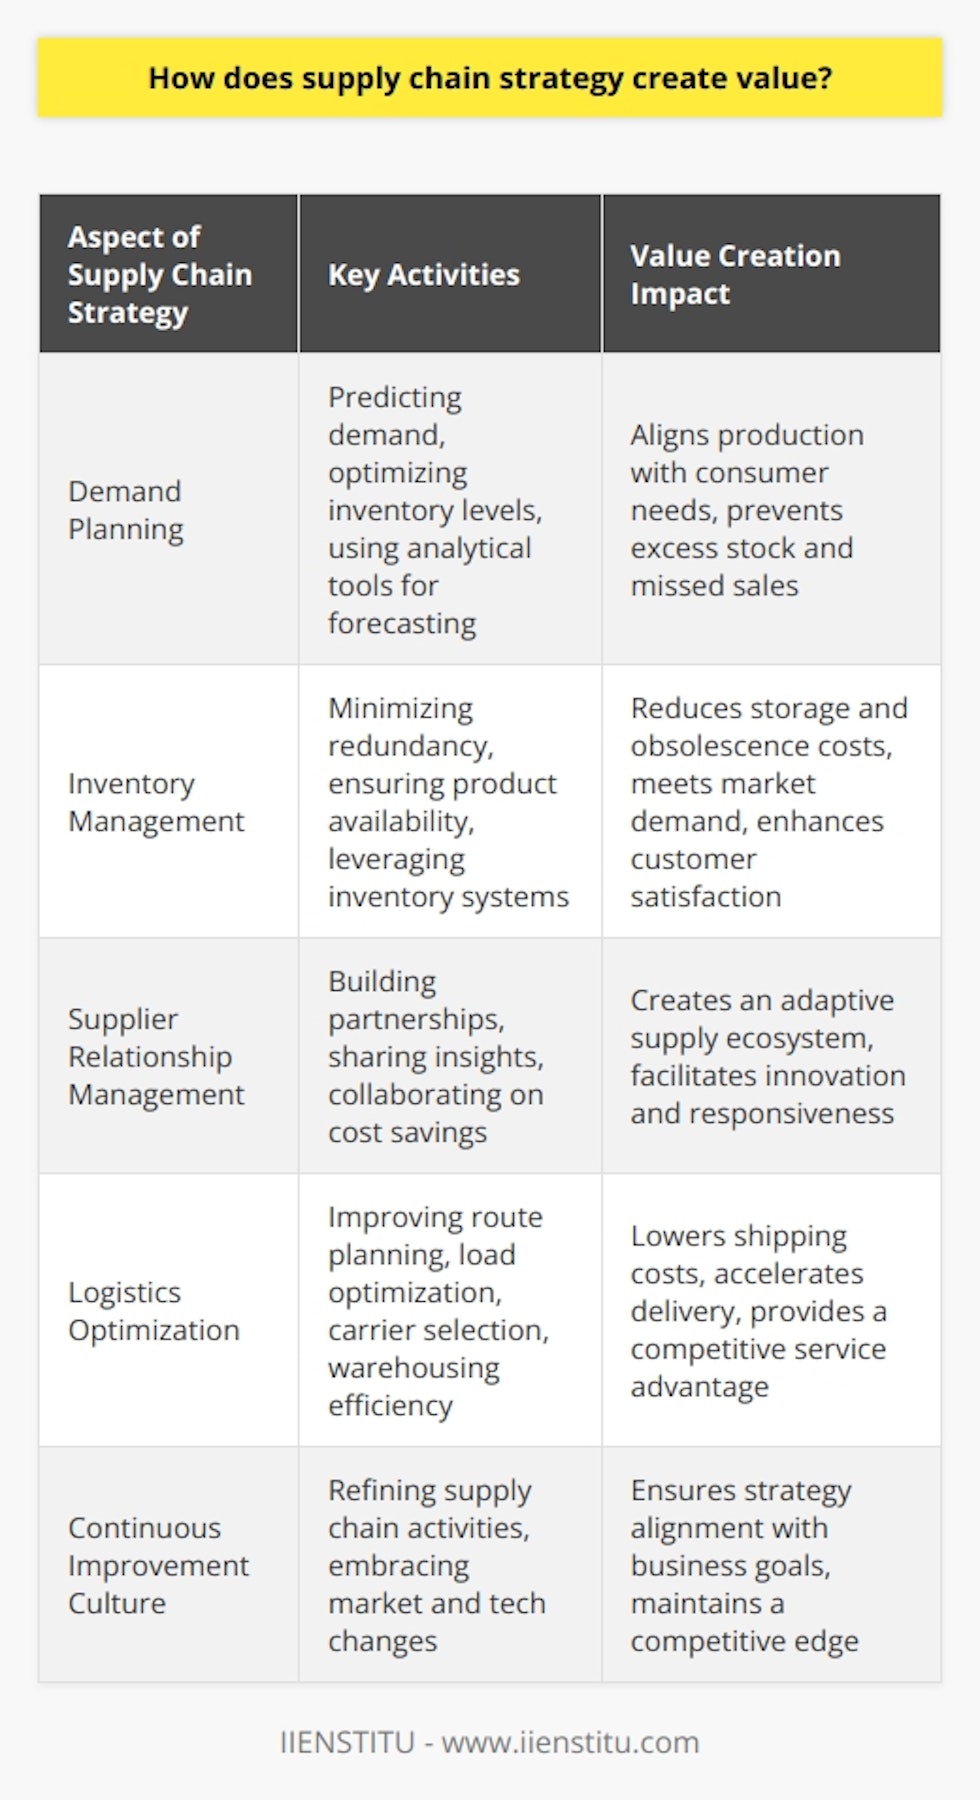 Supply chain strategy is a fundamental element in enhancing organizational value. It encompasses the careful design and management of processes and relationships that span from raw material sourcing to the delivery of finished products to the end customer. With global markets growing more competitive, a well-devised supply chain strategy can offer considerable value by refining efficiency, reducing costs, and increasing customer satisfaction.Efficient demand planning is crucial for aligning production with customer needs. Predicting demand accurately allows firms to optimize their inventory levels, ensuring that capital is not tied up in excess stock, while also guarding against stock shortages that could lead to missed sales opportunities. By using analytical tools and market data, businesses can forecast demand with greater precision and adjust production schedules to maintain the right balance of supply and demand.Inventory management, when executed effectively, significantly contributes to the value creation process. Minimizing redundancy in inventory can substantially reduce costs related to storage, insurance, and risk of obsolescence. At the same time, robust inventory systems ensure that there is enough product availability to meet market demand — a factor that can directly influence customer satisfaction and loyalty.Supplier relationship management goes beyond mere transactional interactions. By cultivating strong partnerships with suppliers, businesses can gain insights into materials availability, lead times, and potential cost-saving collaborations. These relationships can turn supply chains into integrated ecosystems capable of quickly adapting to change and innovation, thus creating significant value.Logistics optimization focuses on delivering products to customers in the most efficient and cost-effective way possible. Efficient logistics encompass route planning, load optimization, carrier selection, and warehousing efficiency, all of which contribute to lower shipping costs and faster delivery times. Companies that excel at logistics not only save on operational costs but also gain competitive advantages through superior customer service.A culture of continuous improvement within the supply chain can unlock additional value. By encouraging a mindset that constantly seeks to refine and enhance supply chain activities, organizations can keep pace with changing market dynamics and technological advancements. This proactive approach ensures that the supply chain strategy remains aligned with overall business goals and continues to drive value creation.In sum, a strategic approach to managing the supply chain is a powerful lever for generating organizational value. It delivers tangible benefits such as cost savings, improved profitability, and enhanced customer satisfaction, thereby solidifying a company’s market position. By concentrating on demand planning, inventory management, supplier relationships, and logistics optimization, businesses can build resilient, high-performing supply chains that provide a critical competitive edge in today's dynamic business environment.